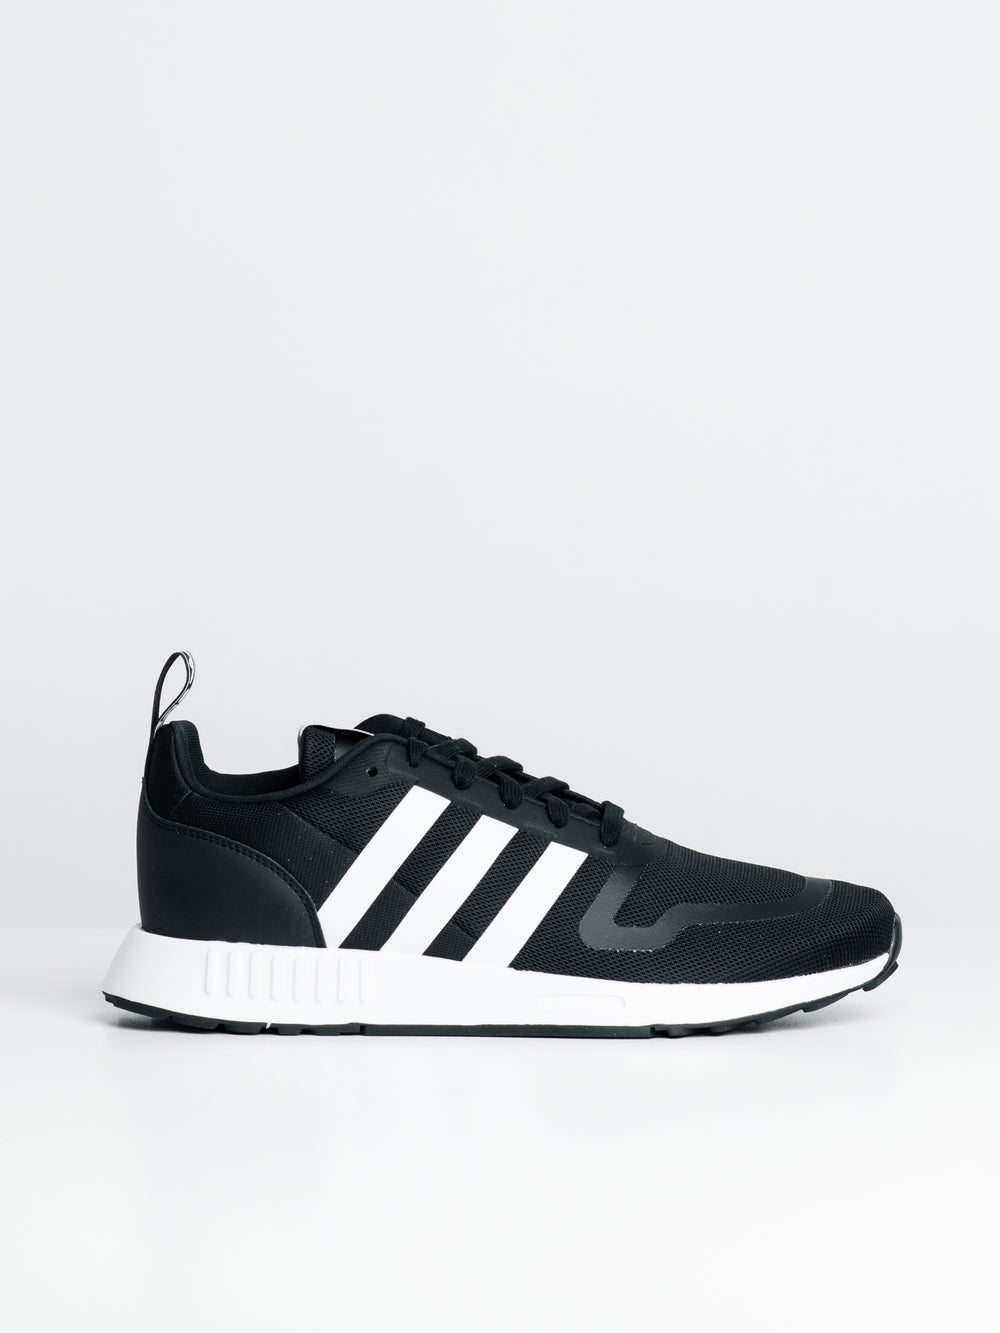 MENS ADIDAS SMOOTH RUNNER - CLEARANCE